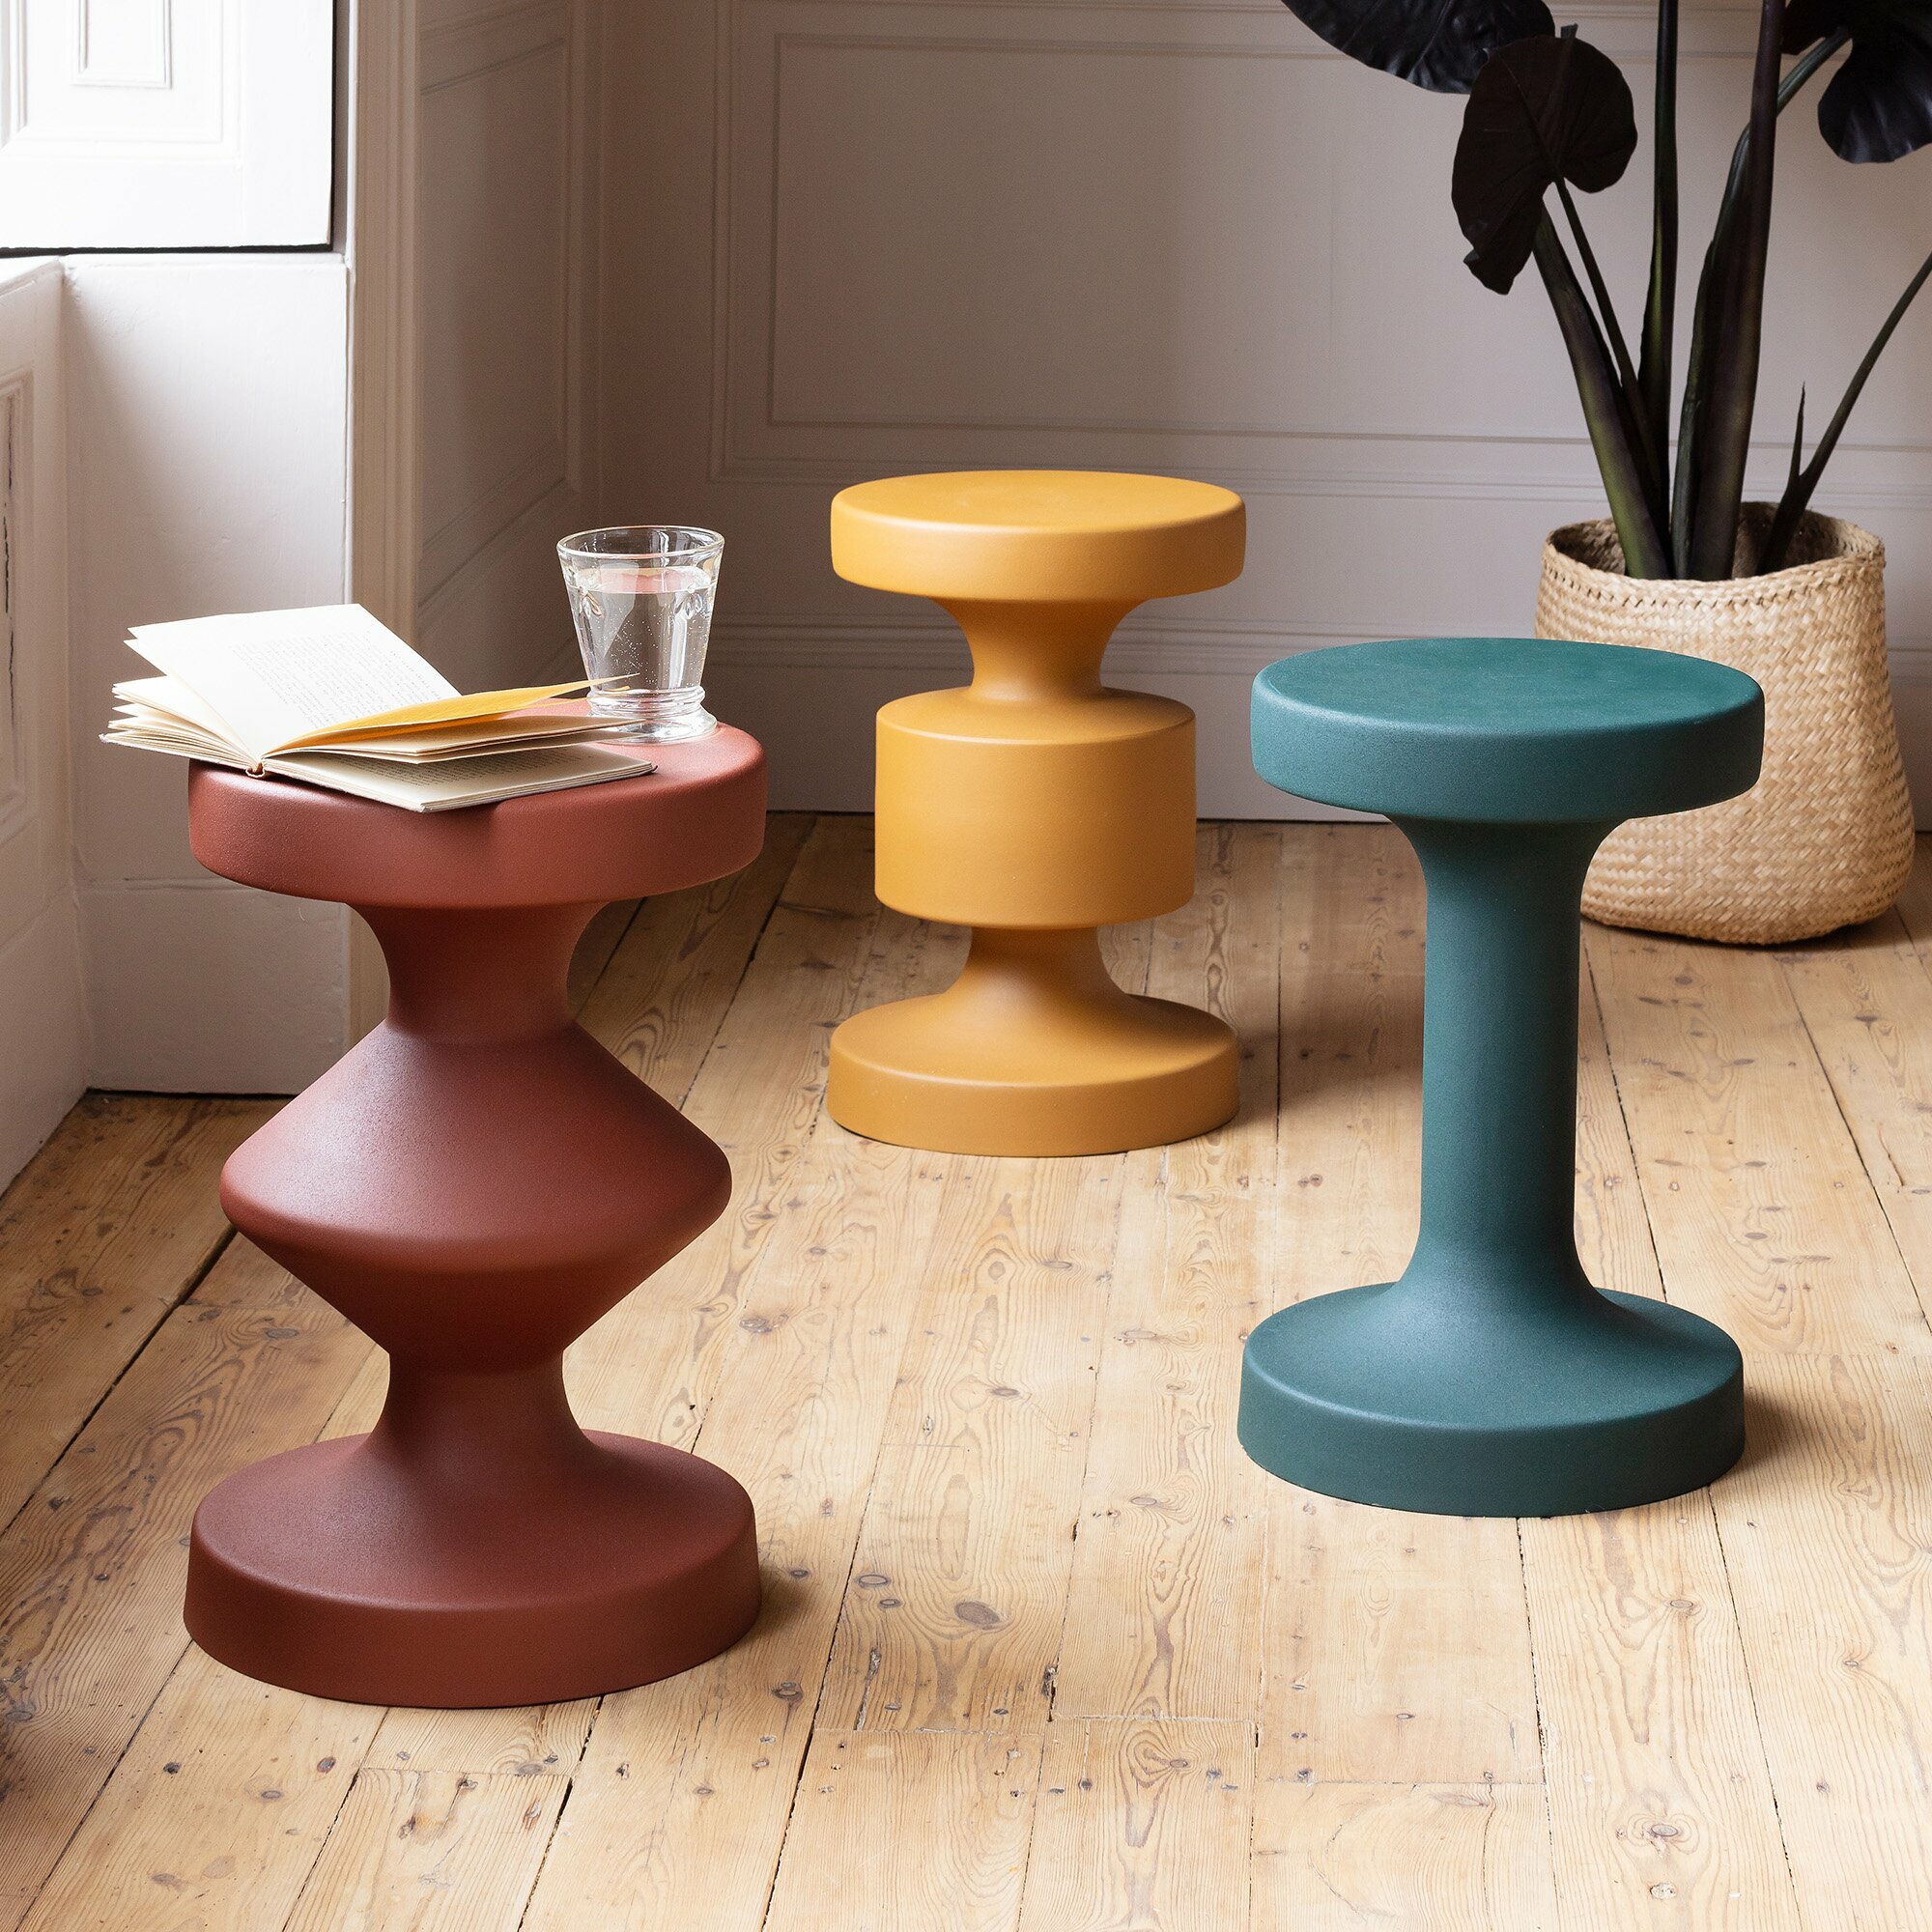 Read more about Graham and green red metal side table